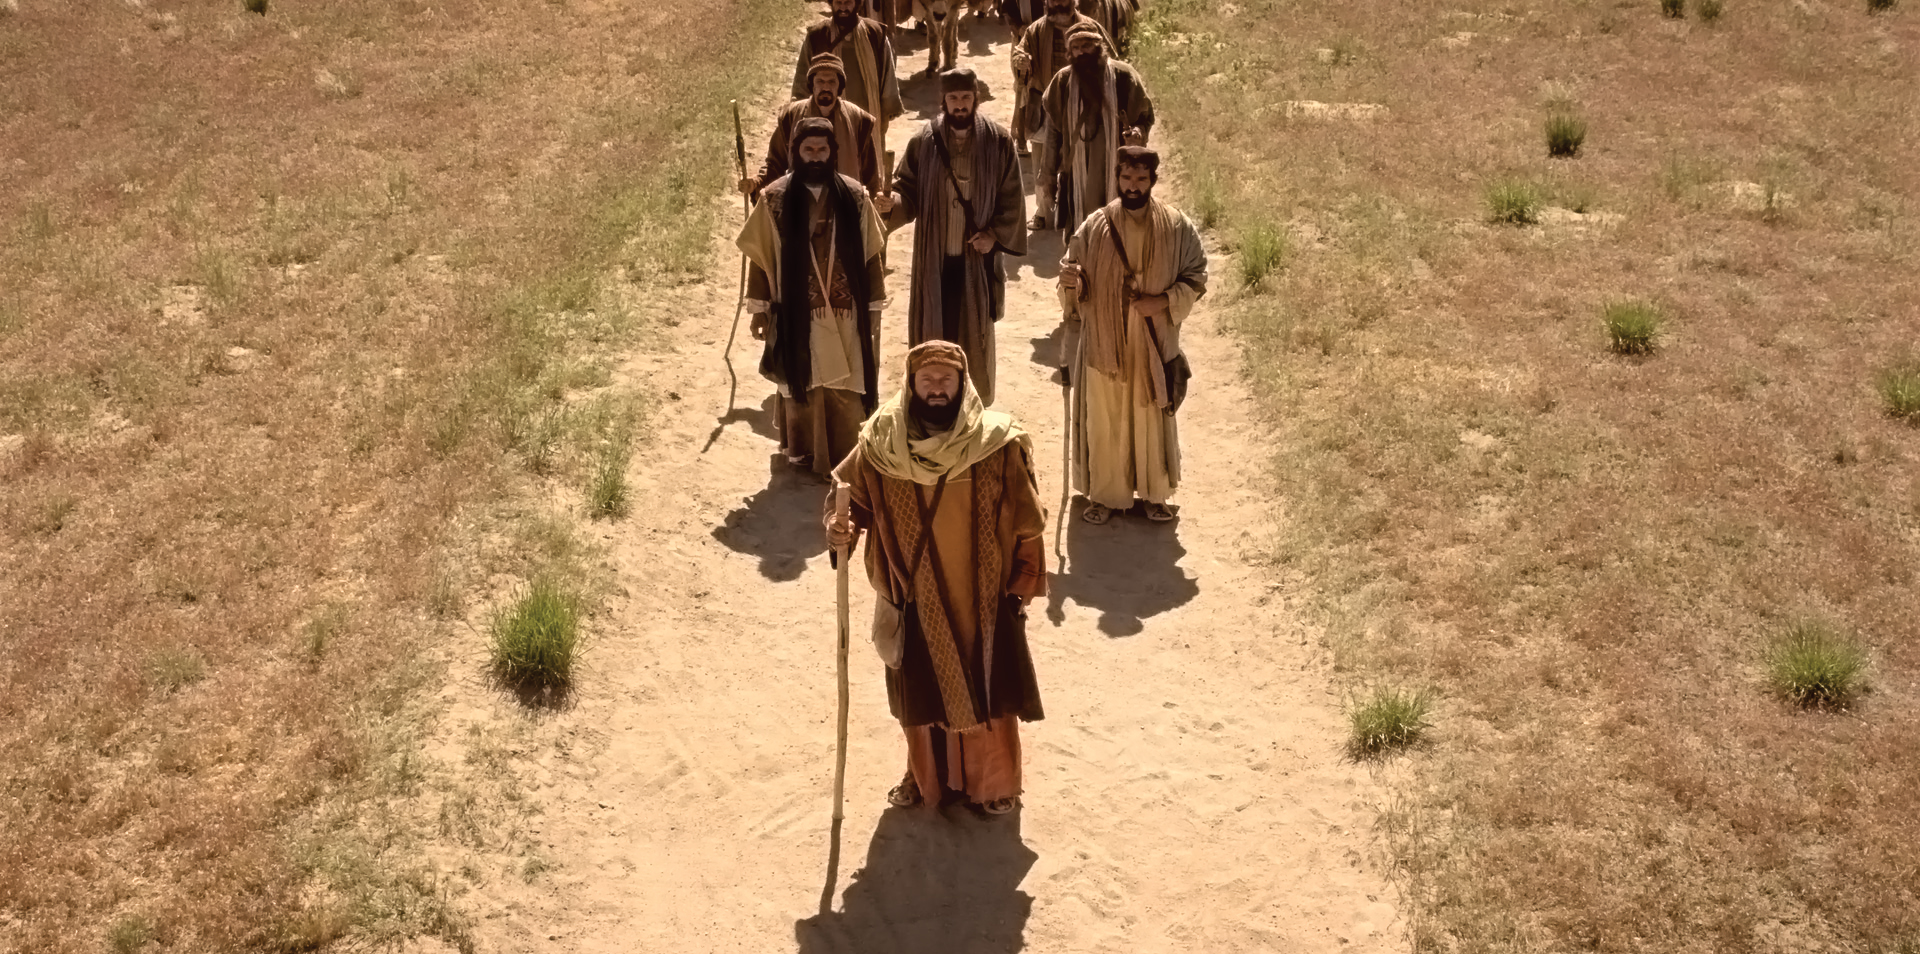 Acts 22, Saul and his company on the road to Damascus